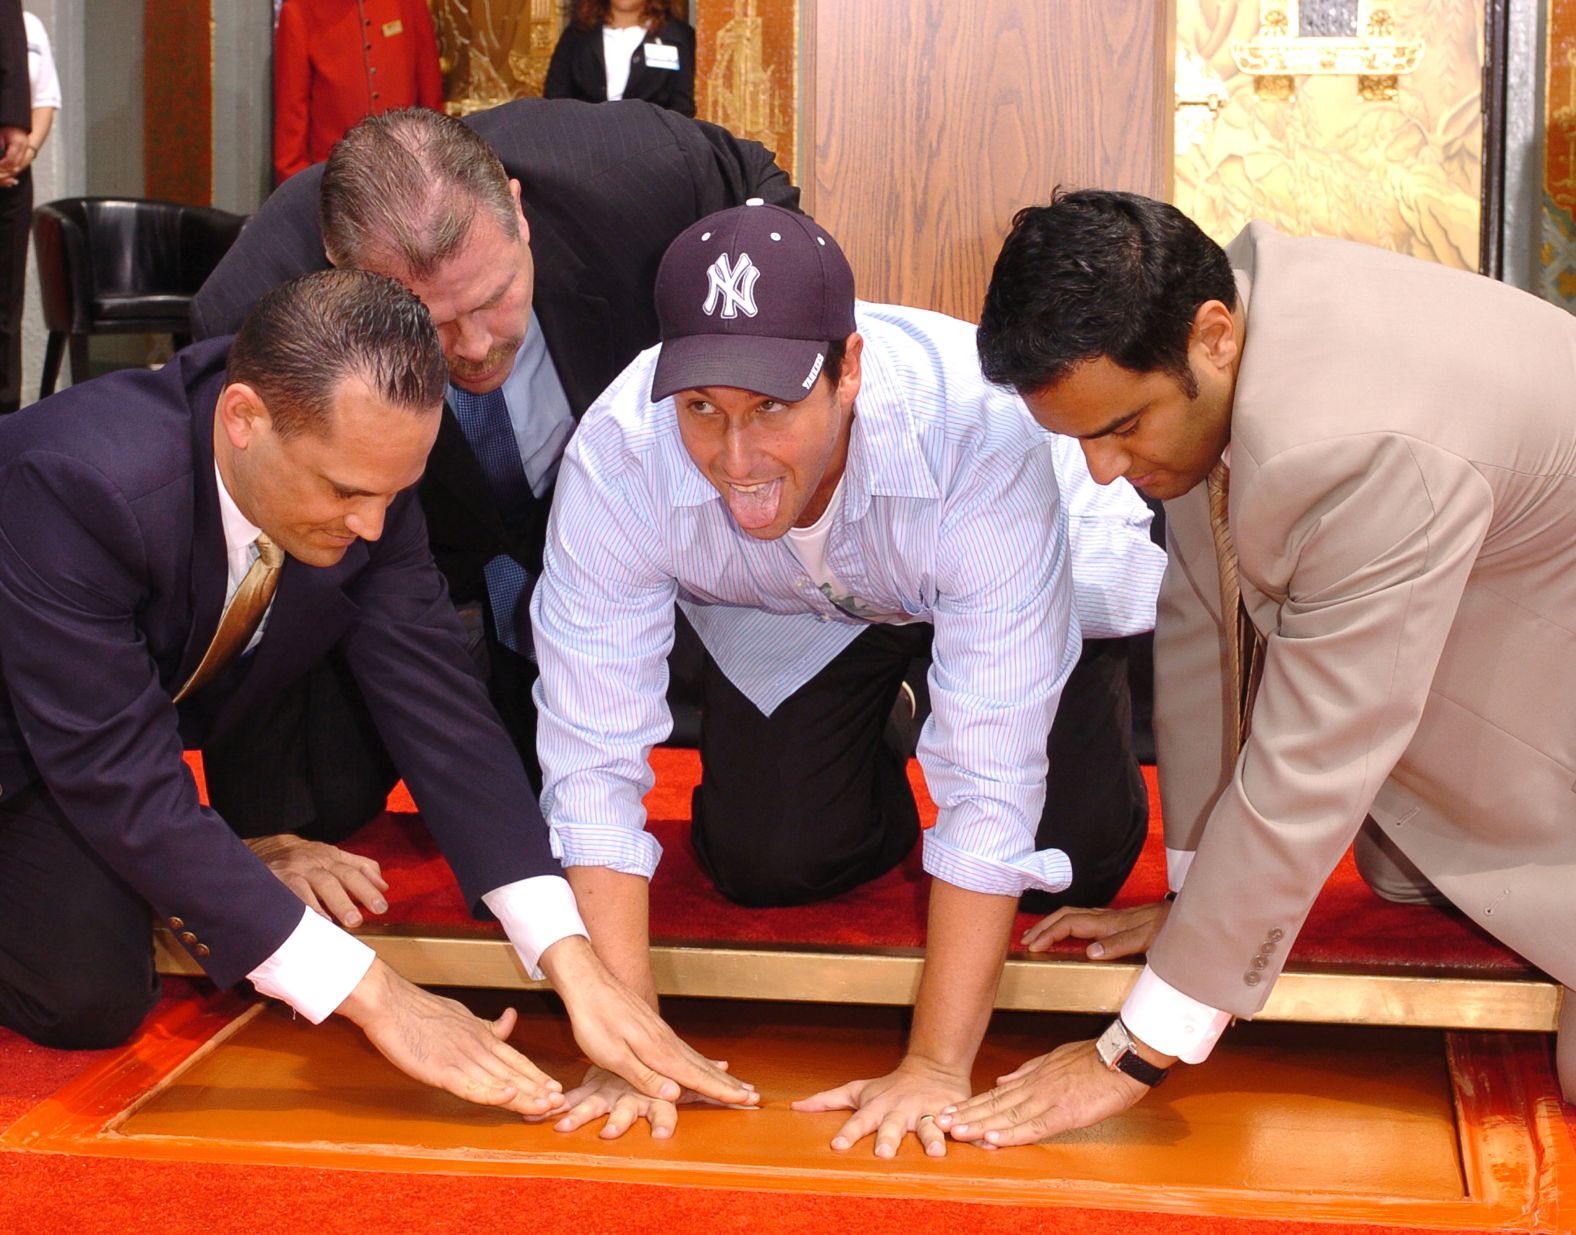 Sandler leaves his handprints at the famous Grauman's Chinese Theatre in Hollywood in May 2005.